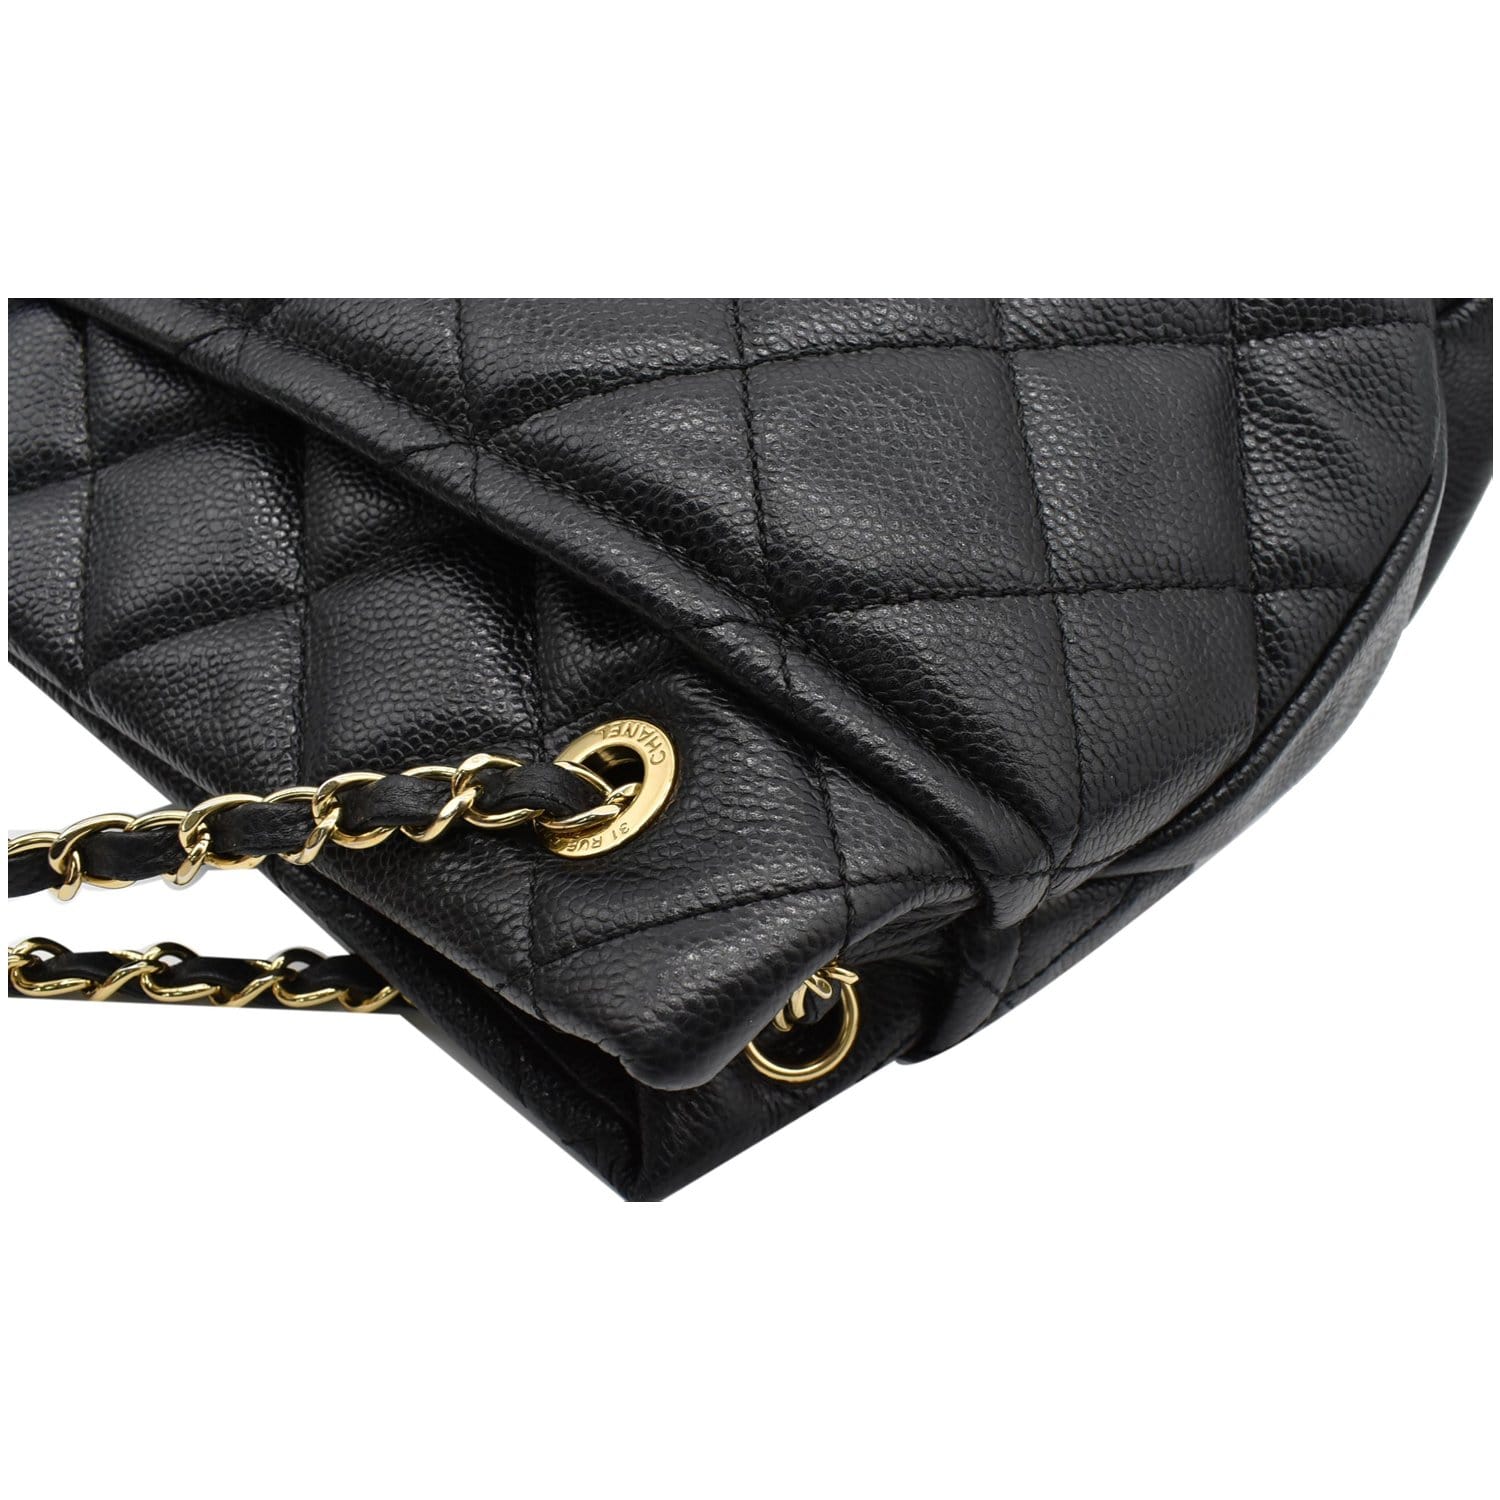 CHANEL, Bags, Chanel Caviar Quilted Timeless Cc Shoulder Bag Black